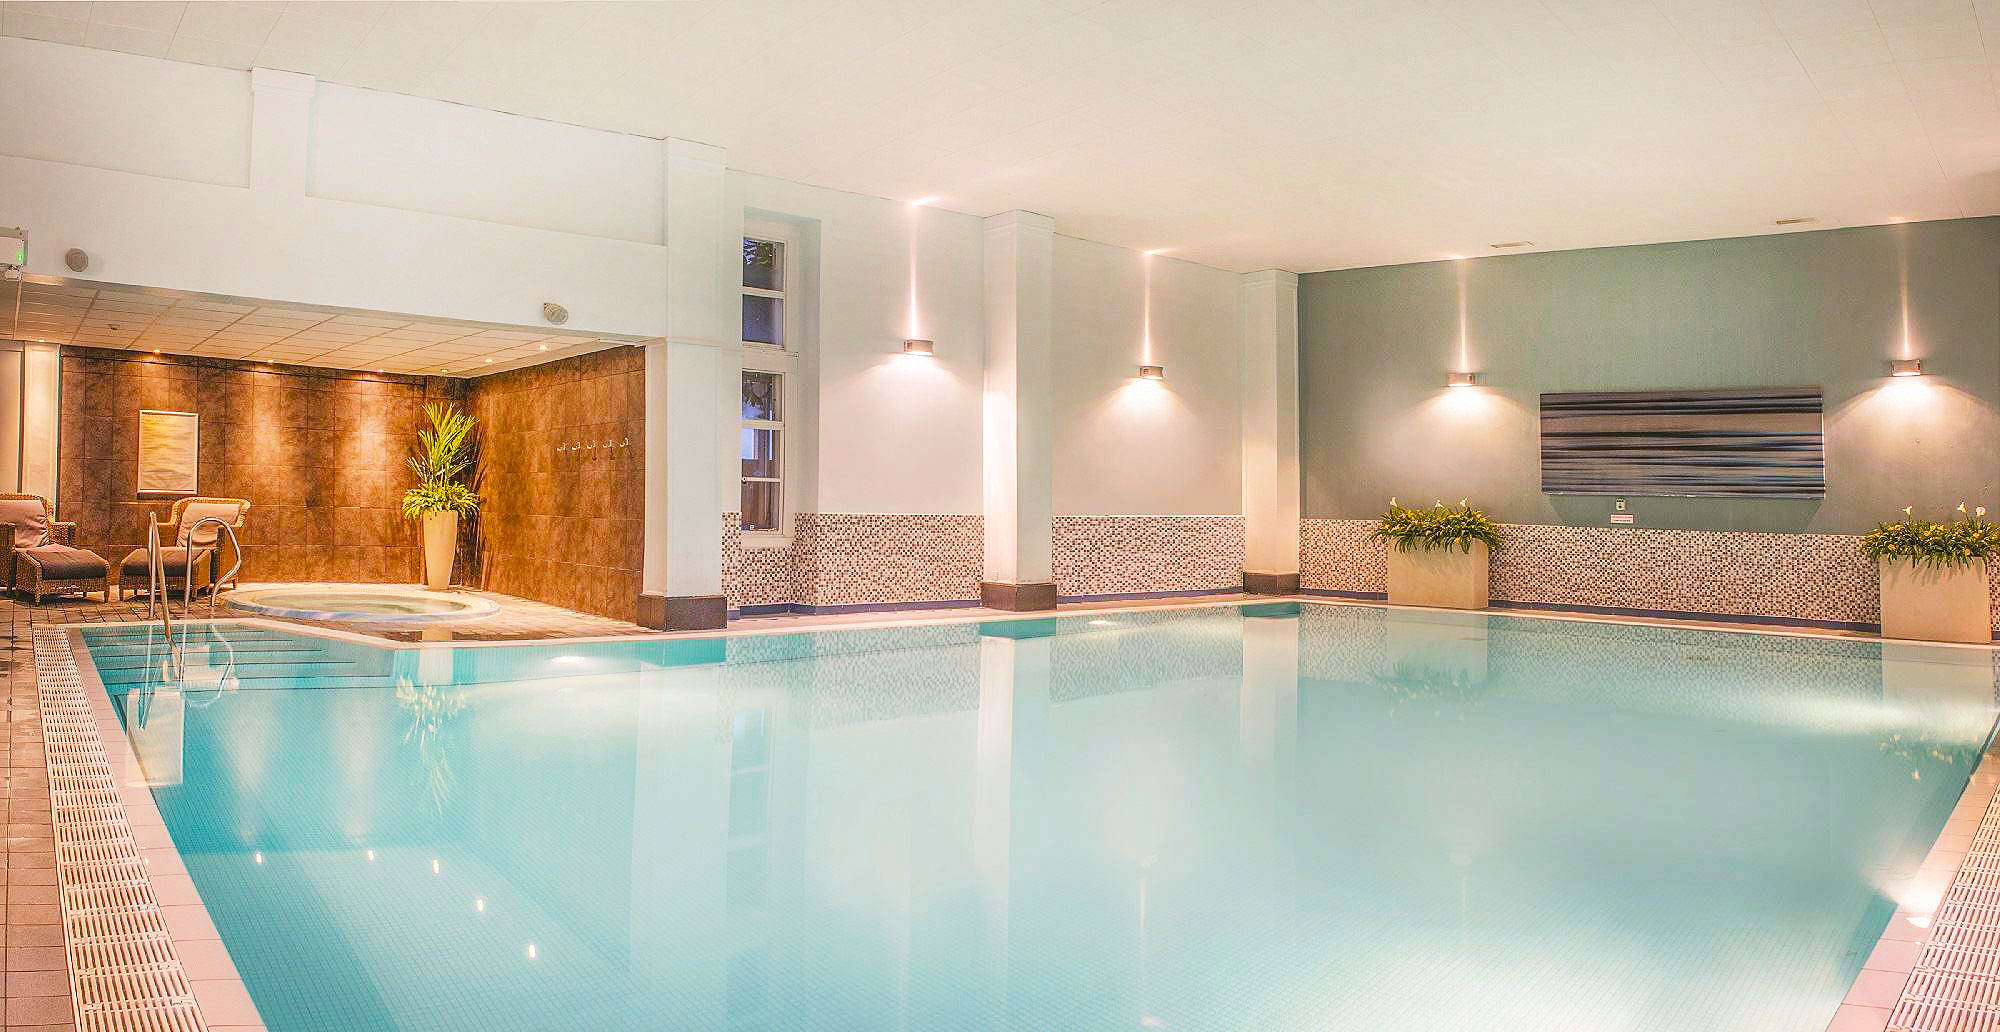 De Vere Tortworth Court Is An Ideal Place To Unwind And Recharge